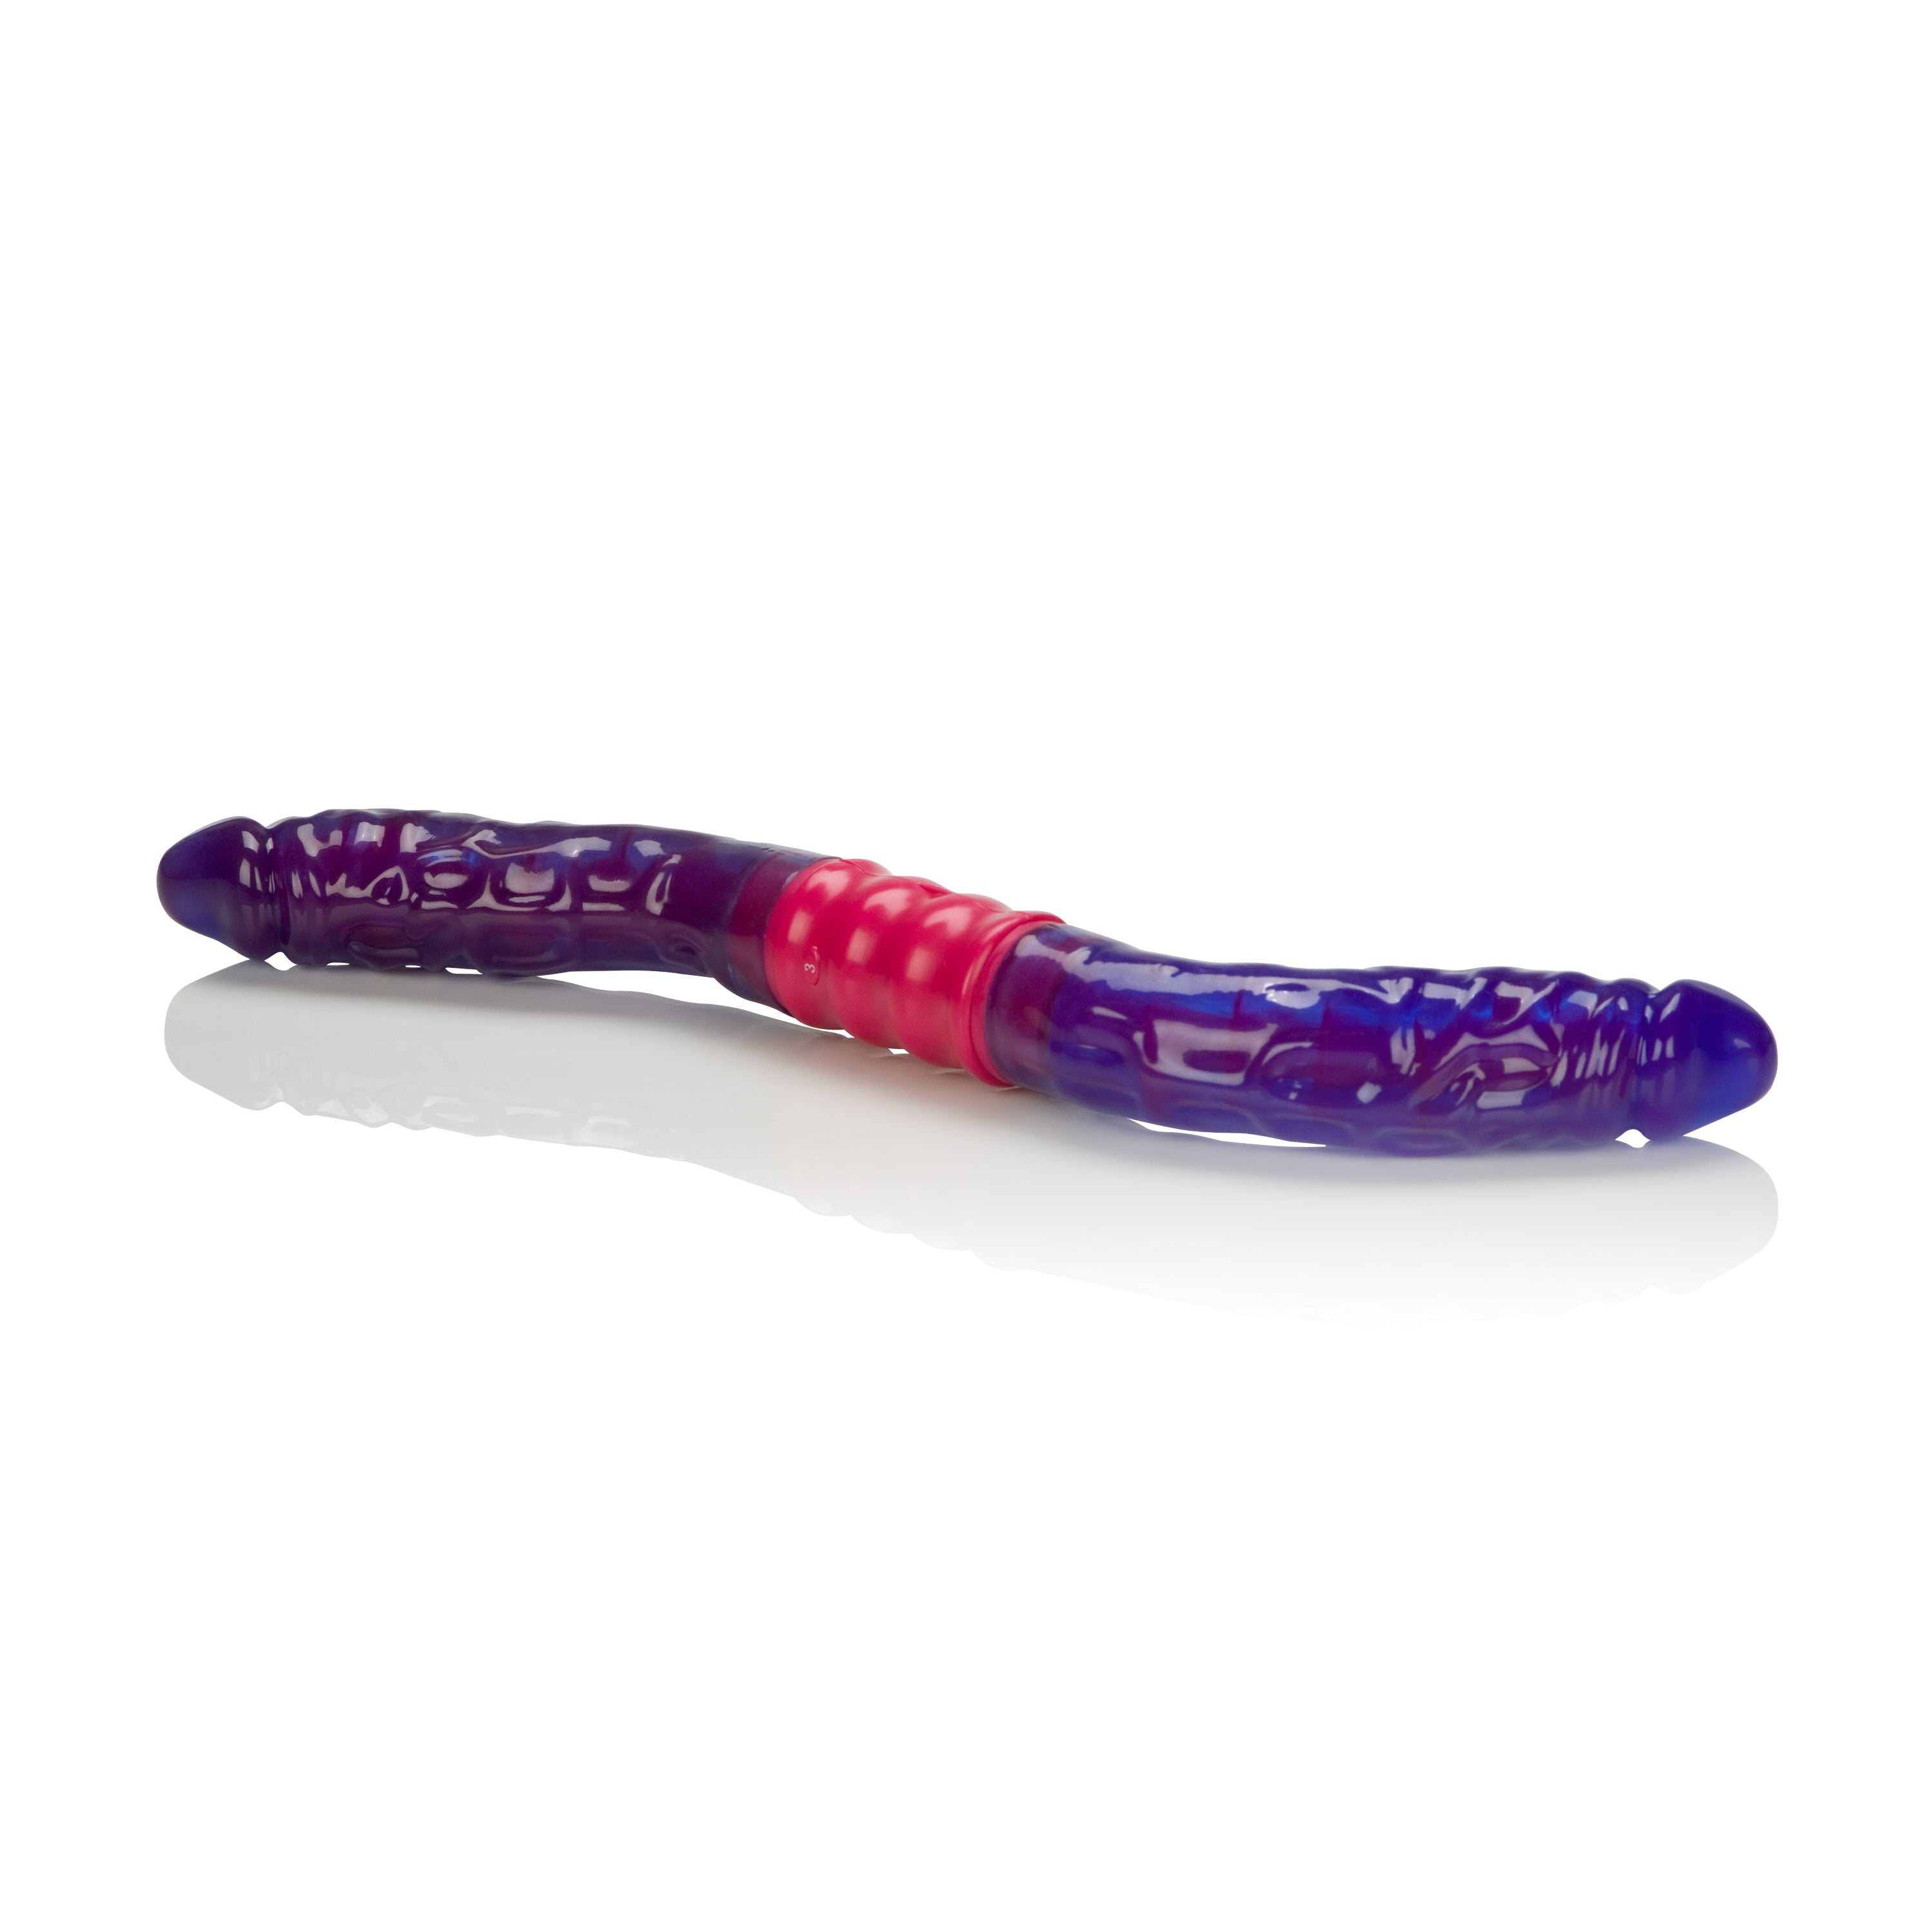 Dual Vibrating Flexi Dong - 15-Inch Double-Ended Vibrating Dildo by California Exotic Novelties